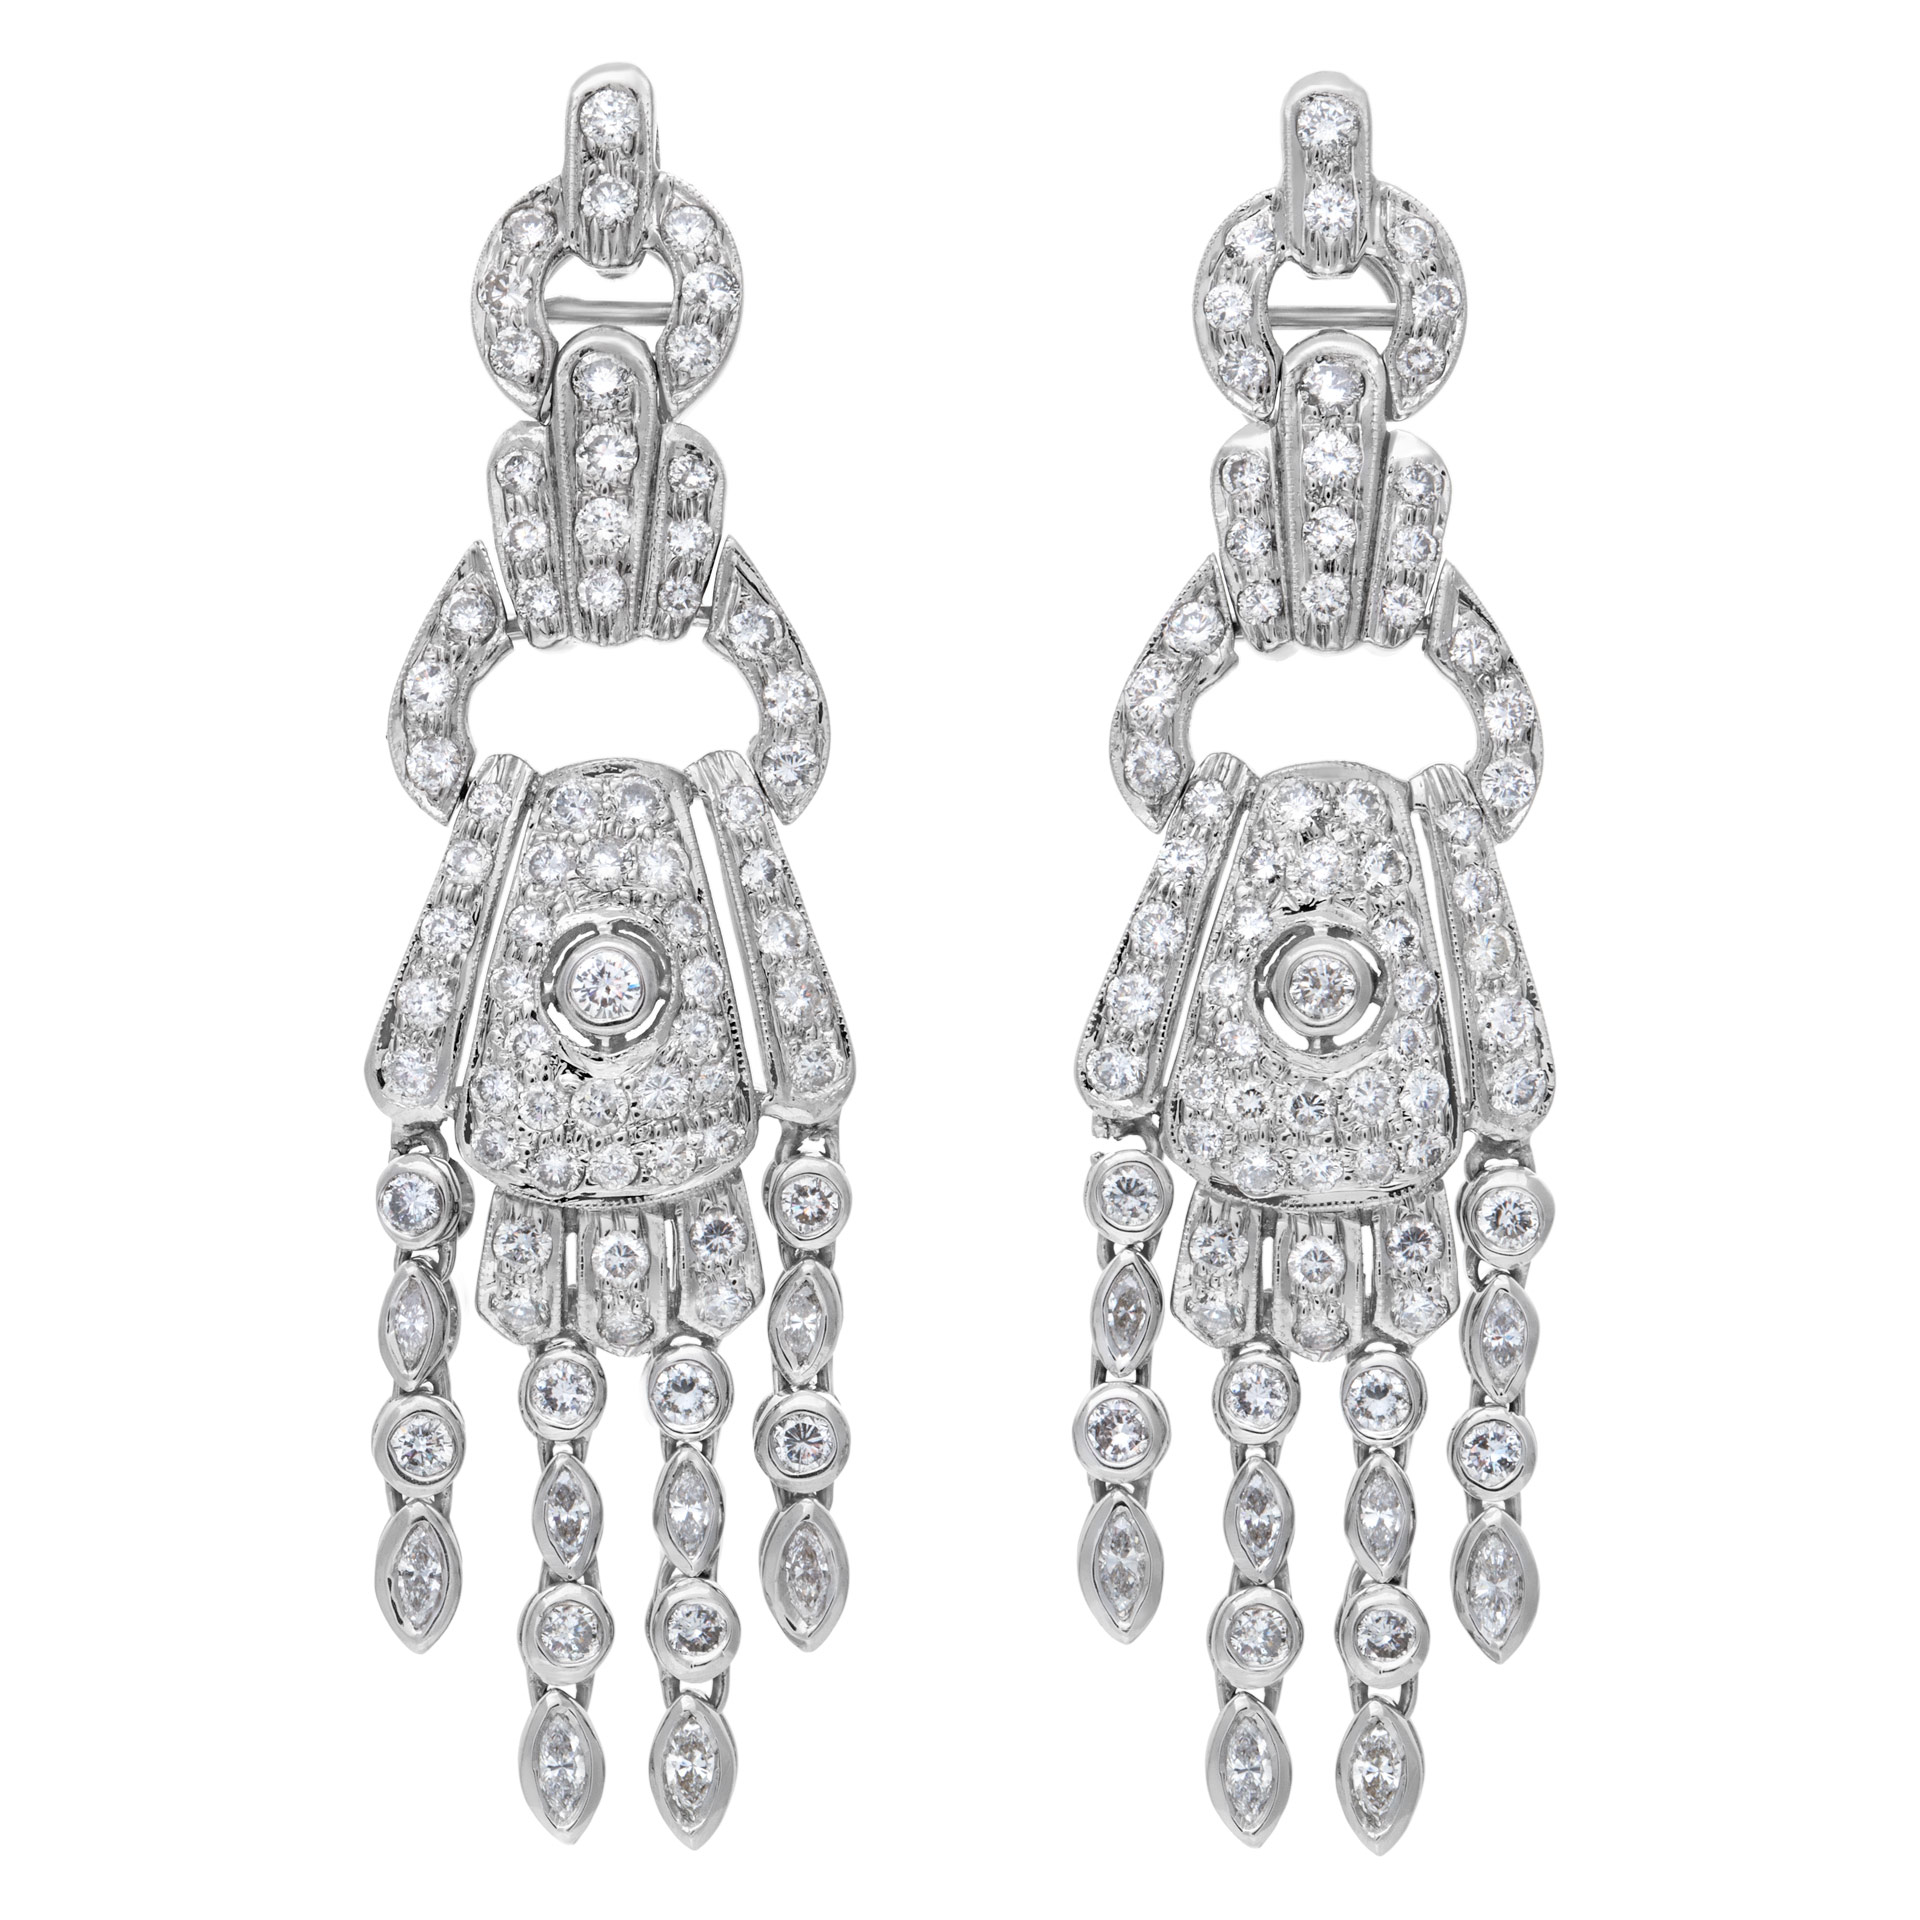 Amazing diamond chandelier earrings 18k white gold over 4.50 cts in diamonds image 1